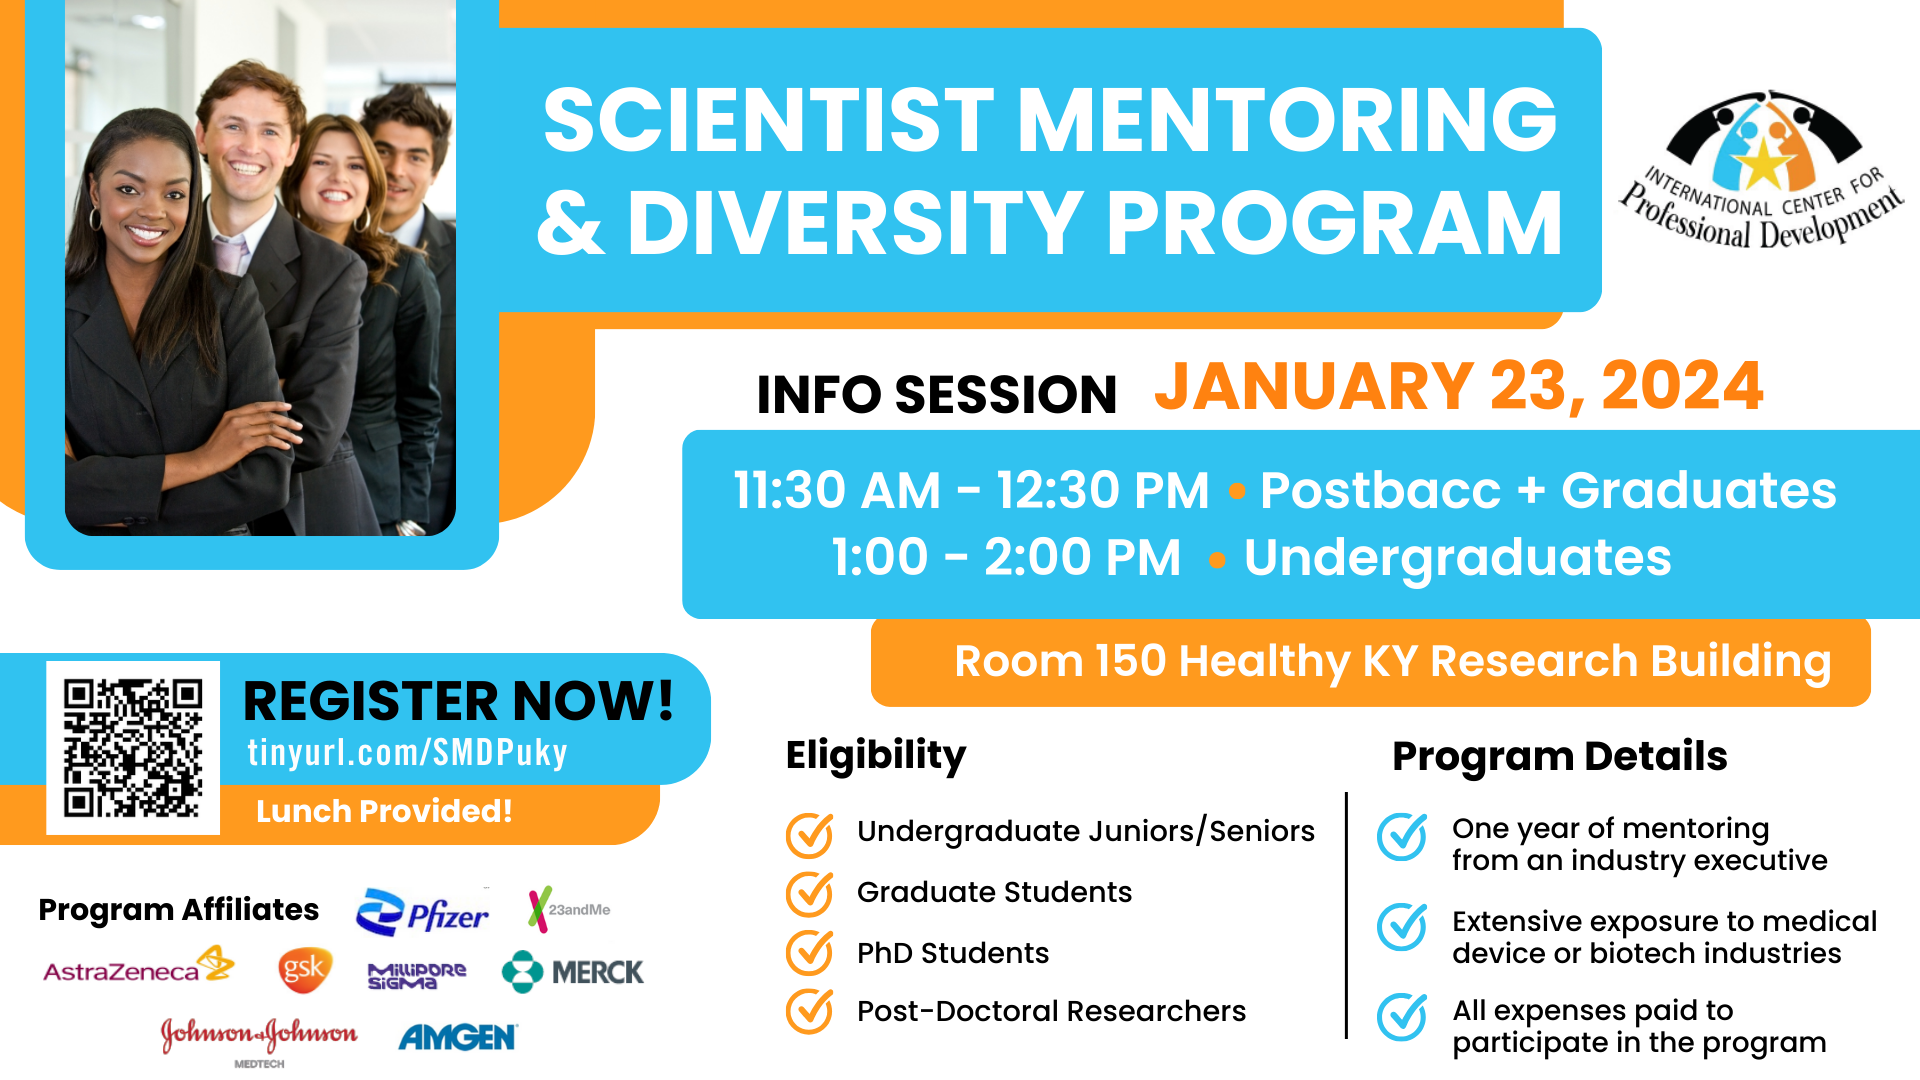 Graphic depicting the scientist mentoring and diversity program with the same information as below.